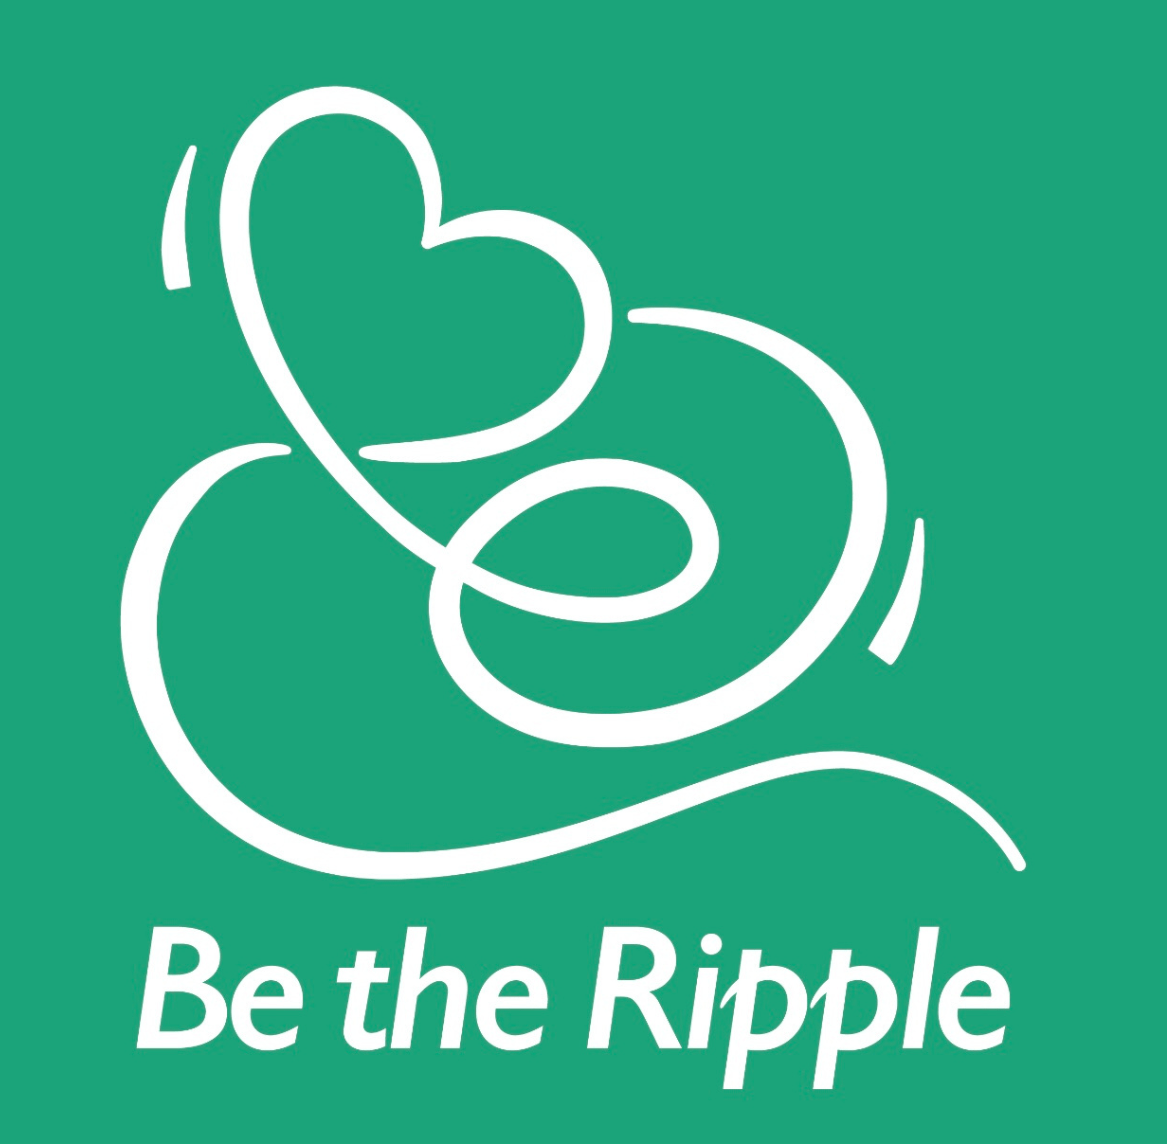 Be the Ripple